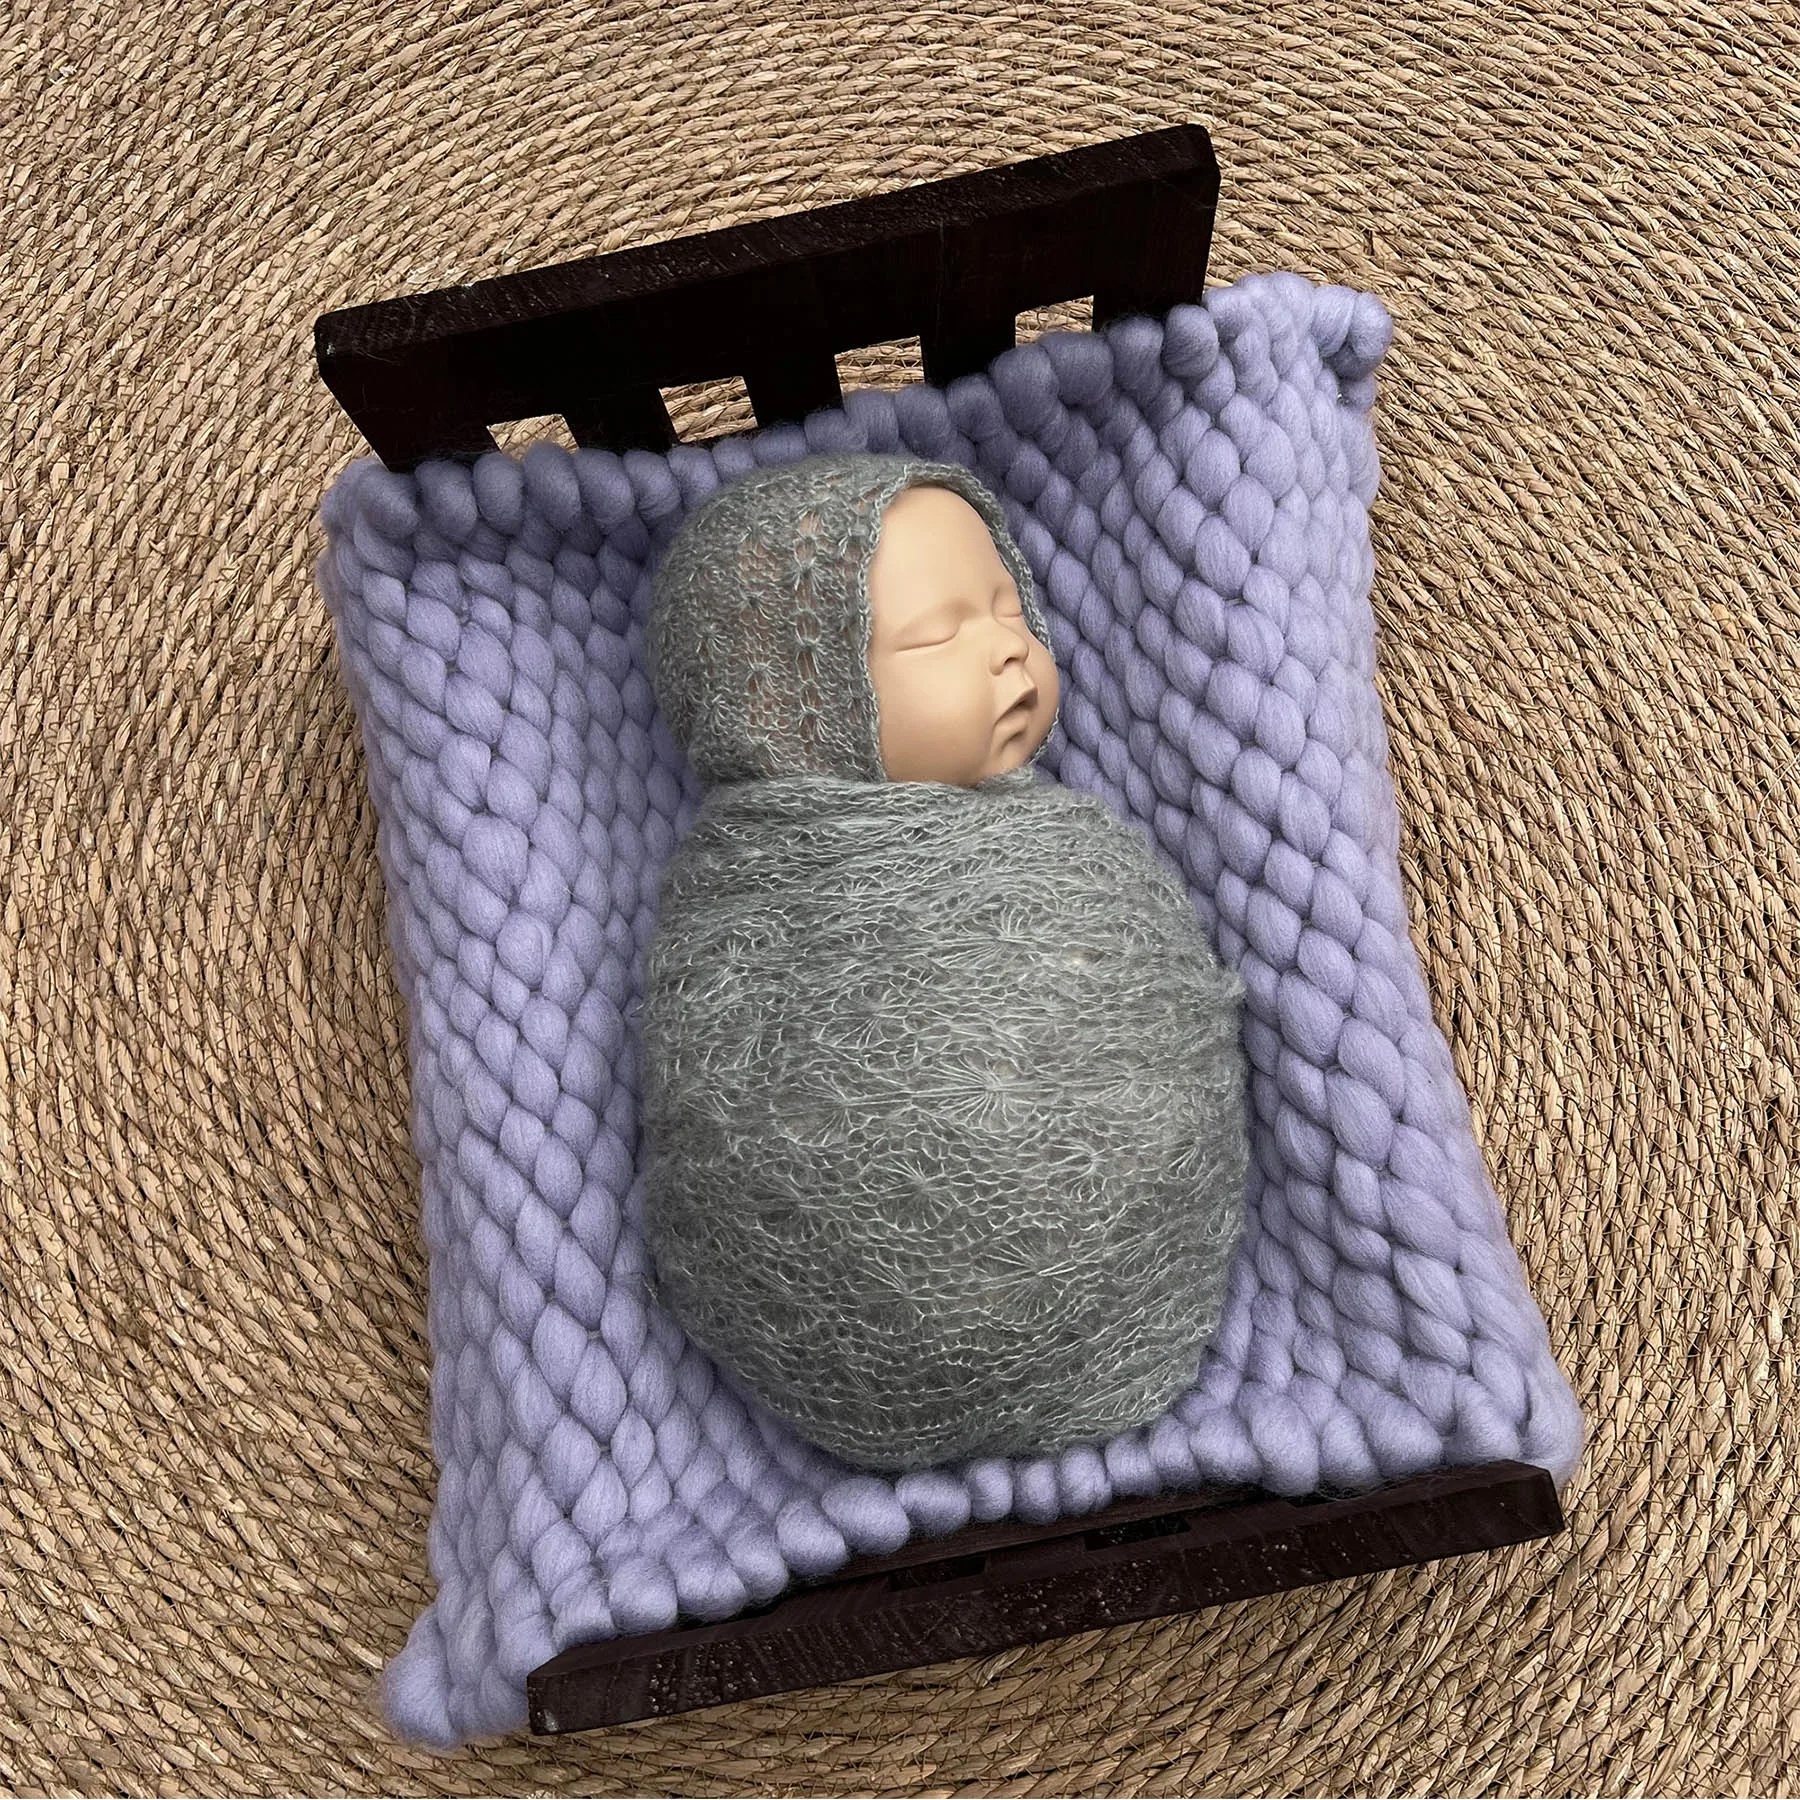 

Don&Judy Newborn Photo Shooting Props Accessories 4pcs/set Baby Posing Wood Bed Wrap Hat Blanket for Photography Infant Studio